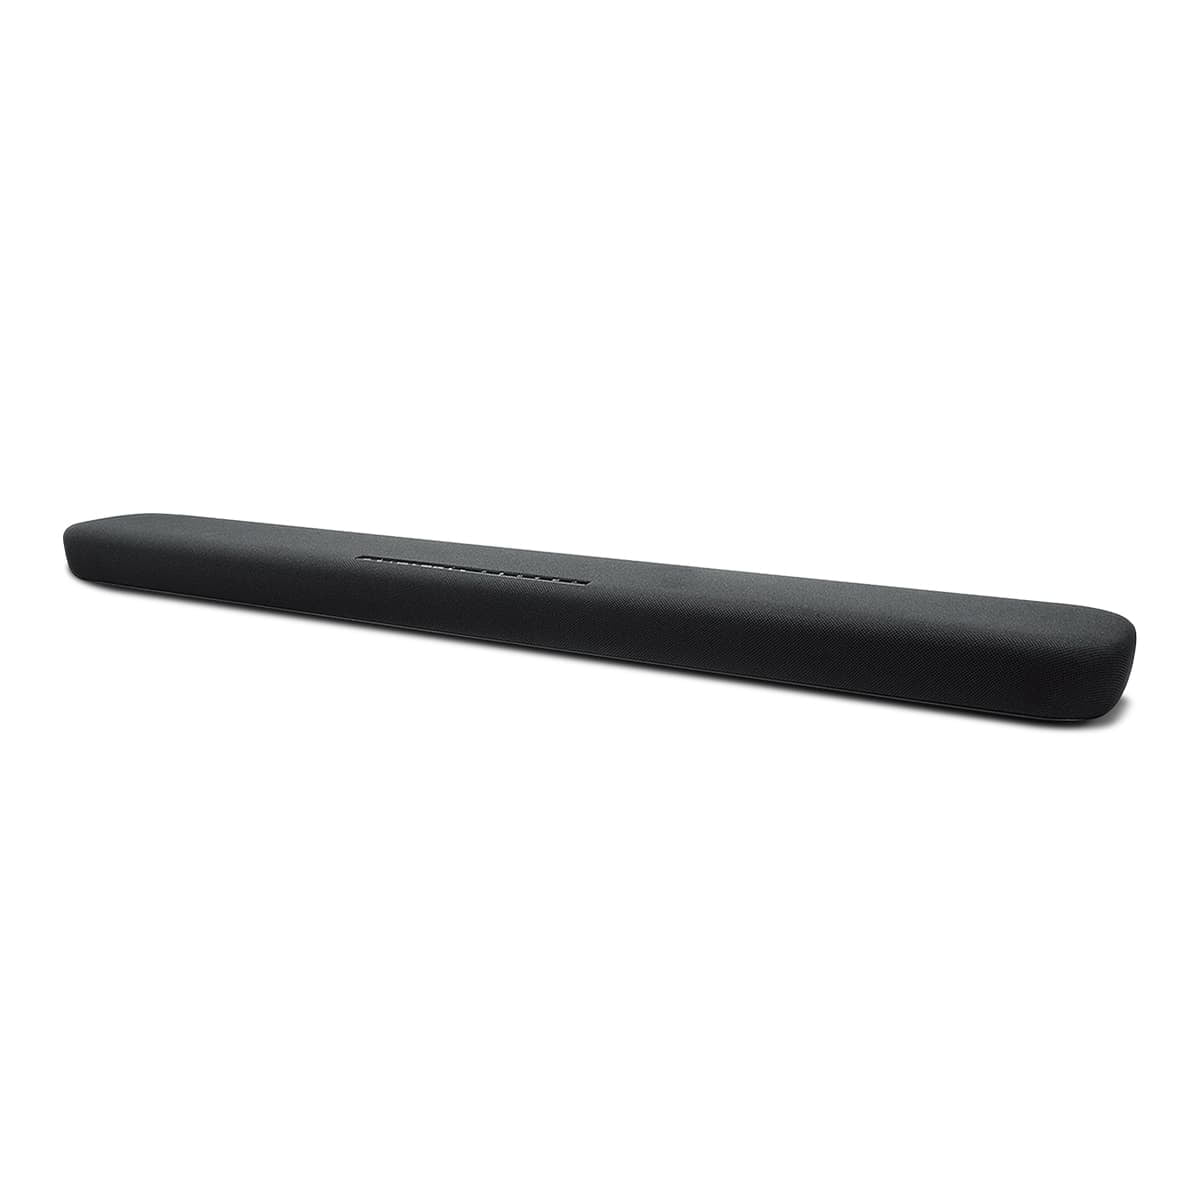 Yamaha Yas-109 Sound Bar with Built-in Subwoofers, Bluetooth